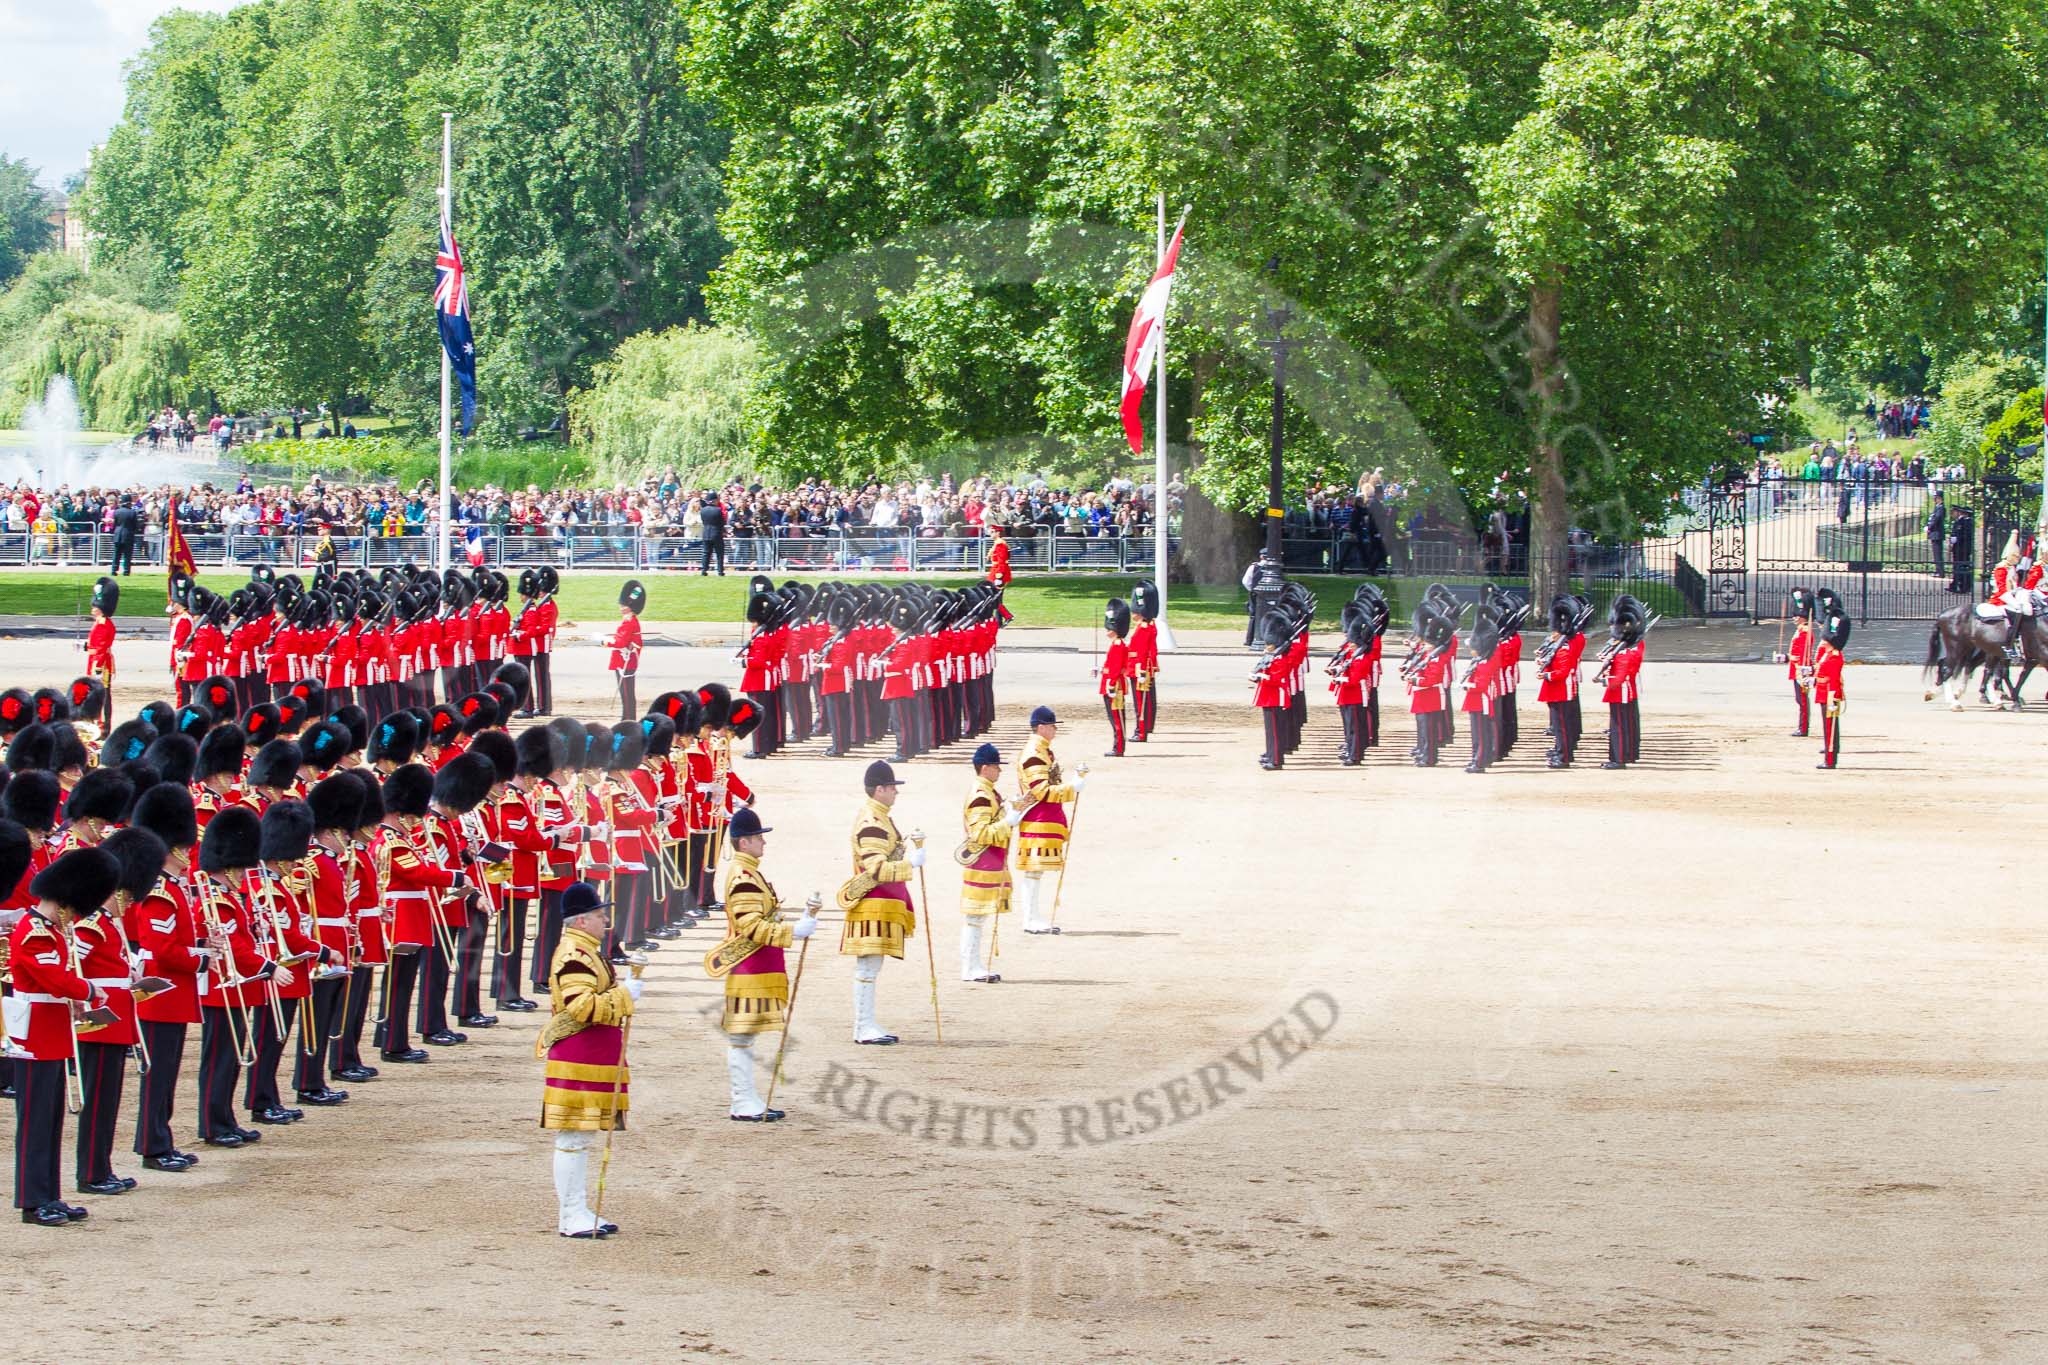 Trooping the Colour 2013: Top left, in front of St James's Park Lake, is No. 1 Guard, the Escort to the Colour, about to lead the other five guards divisions during the March Off. Image #775, 15 June 2013 12:05 Horse Guards Parade, London, UK